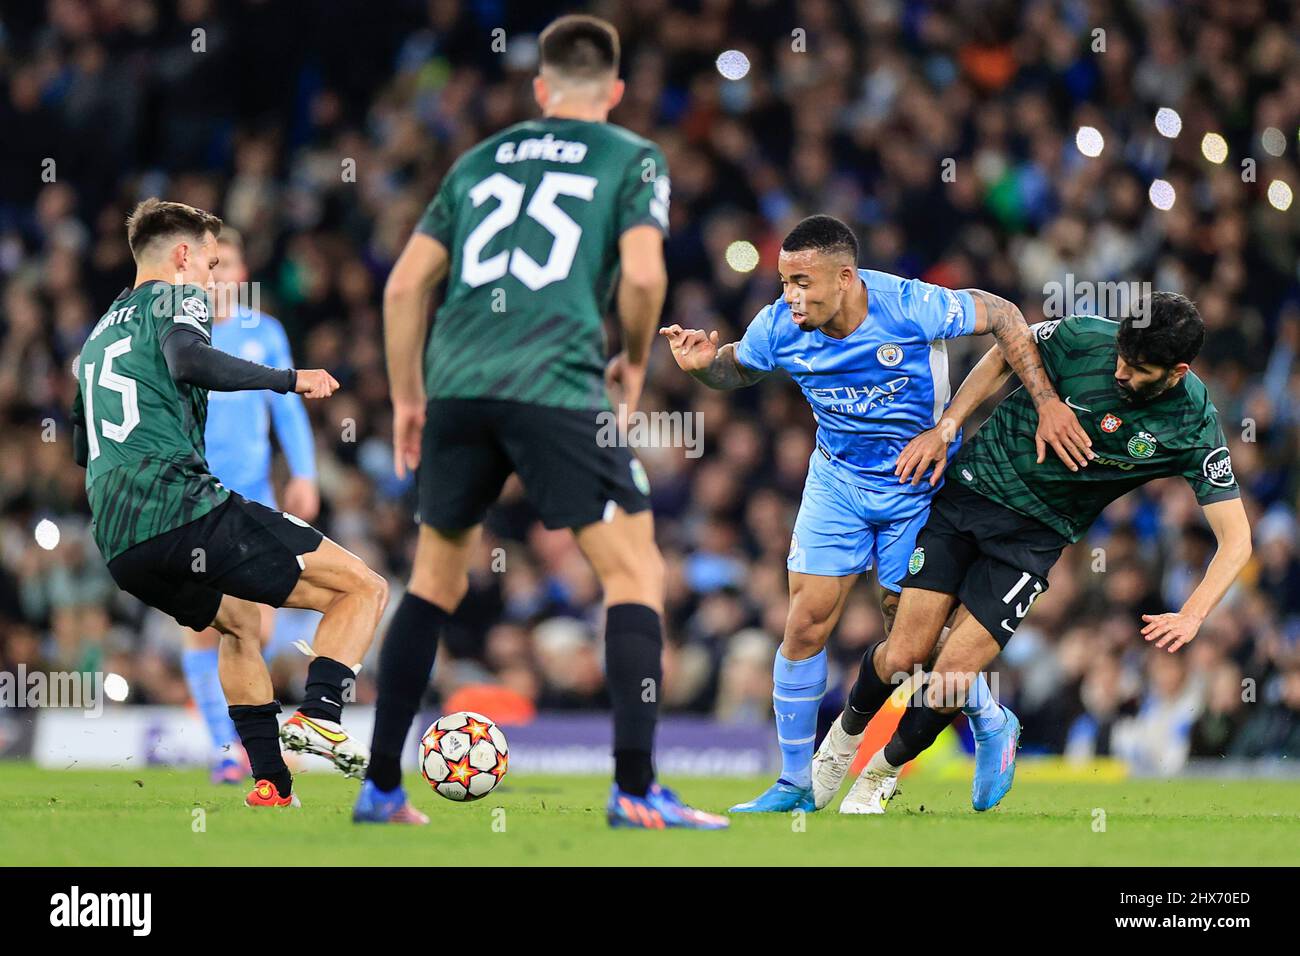 Manchester, UK. 09th Mar, 2022. Gabriel Jesus #9 of Manchester City and Luis Neto #13 of Sporting Lisbon challenge for the ball in Manchester, United Kingdom on 3/9/2022. (Photo by Conor Molloy/News Images/Sipa USA) Credit: Sipa USA/Alamy Live News Stock Photo